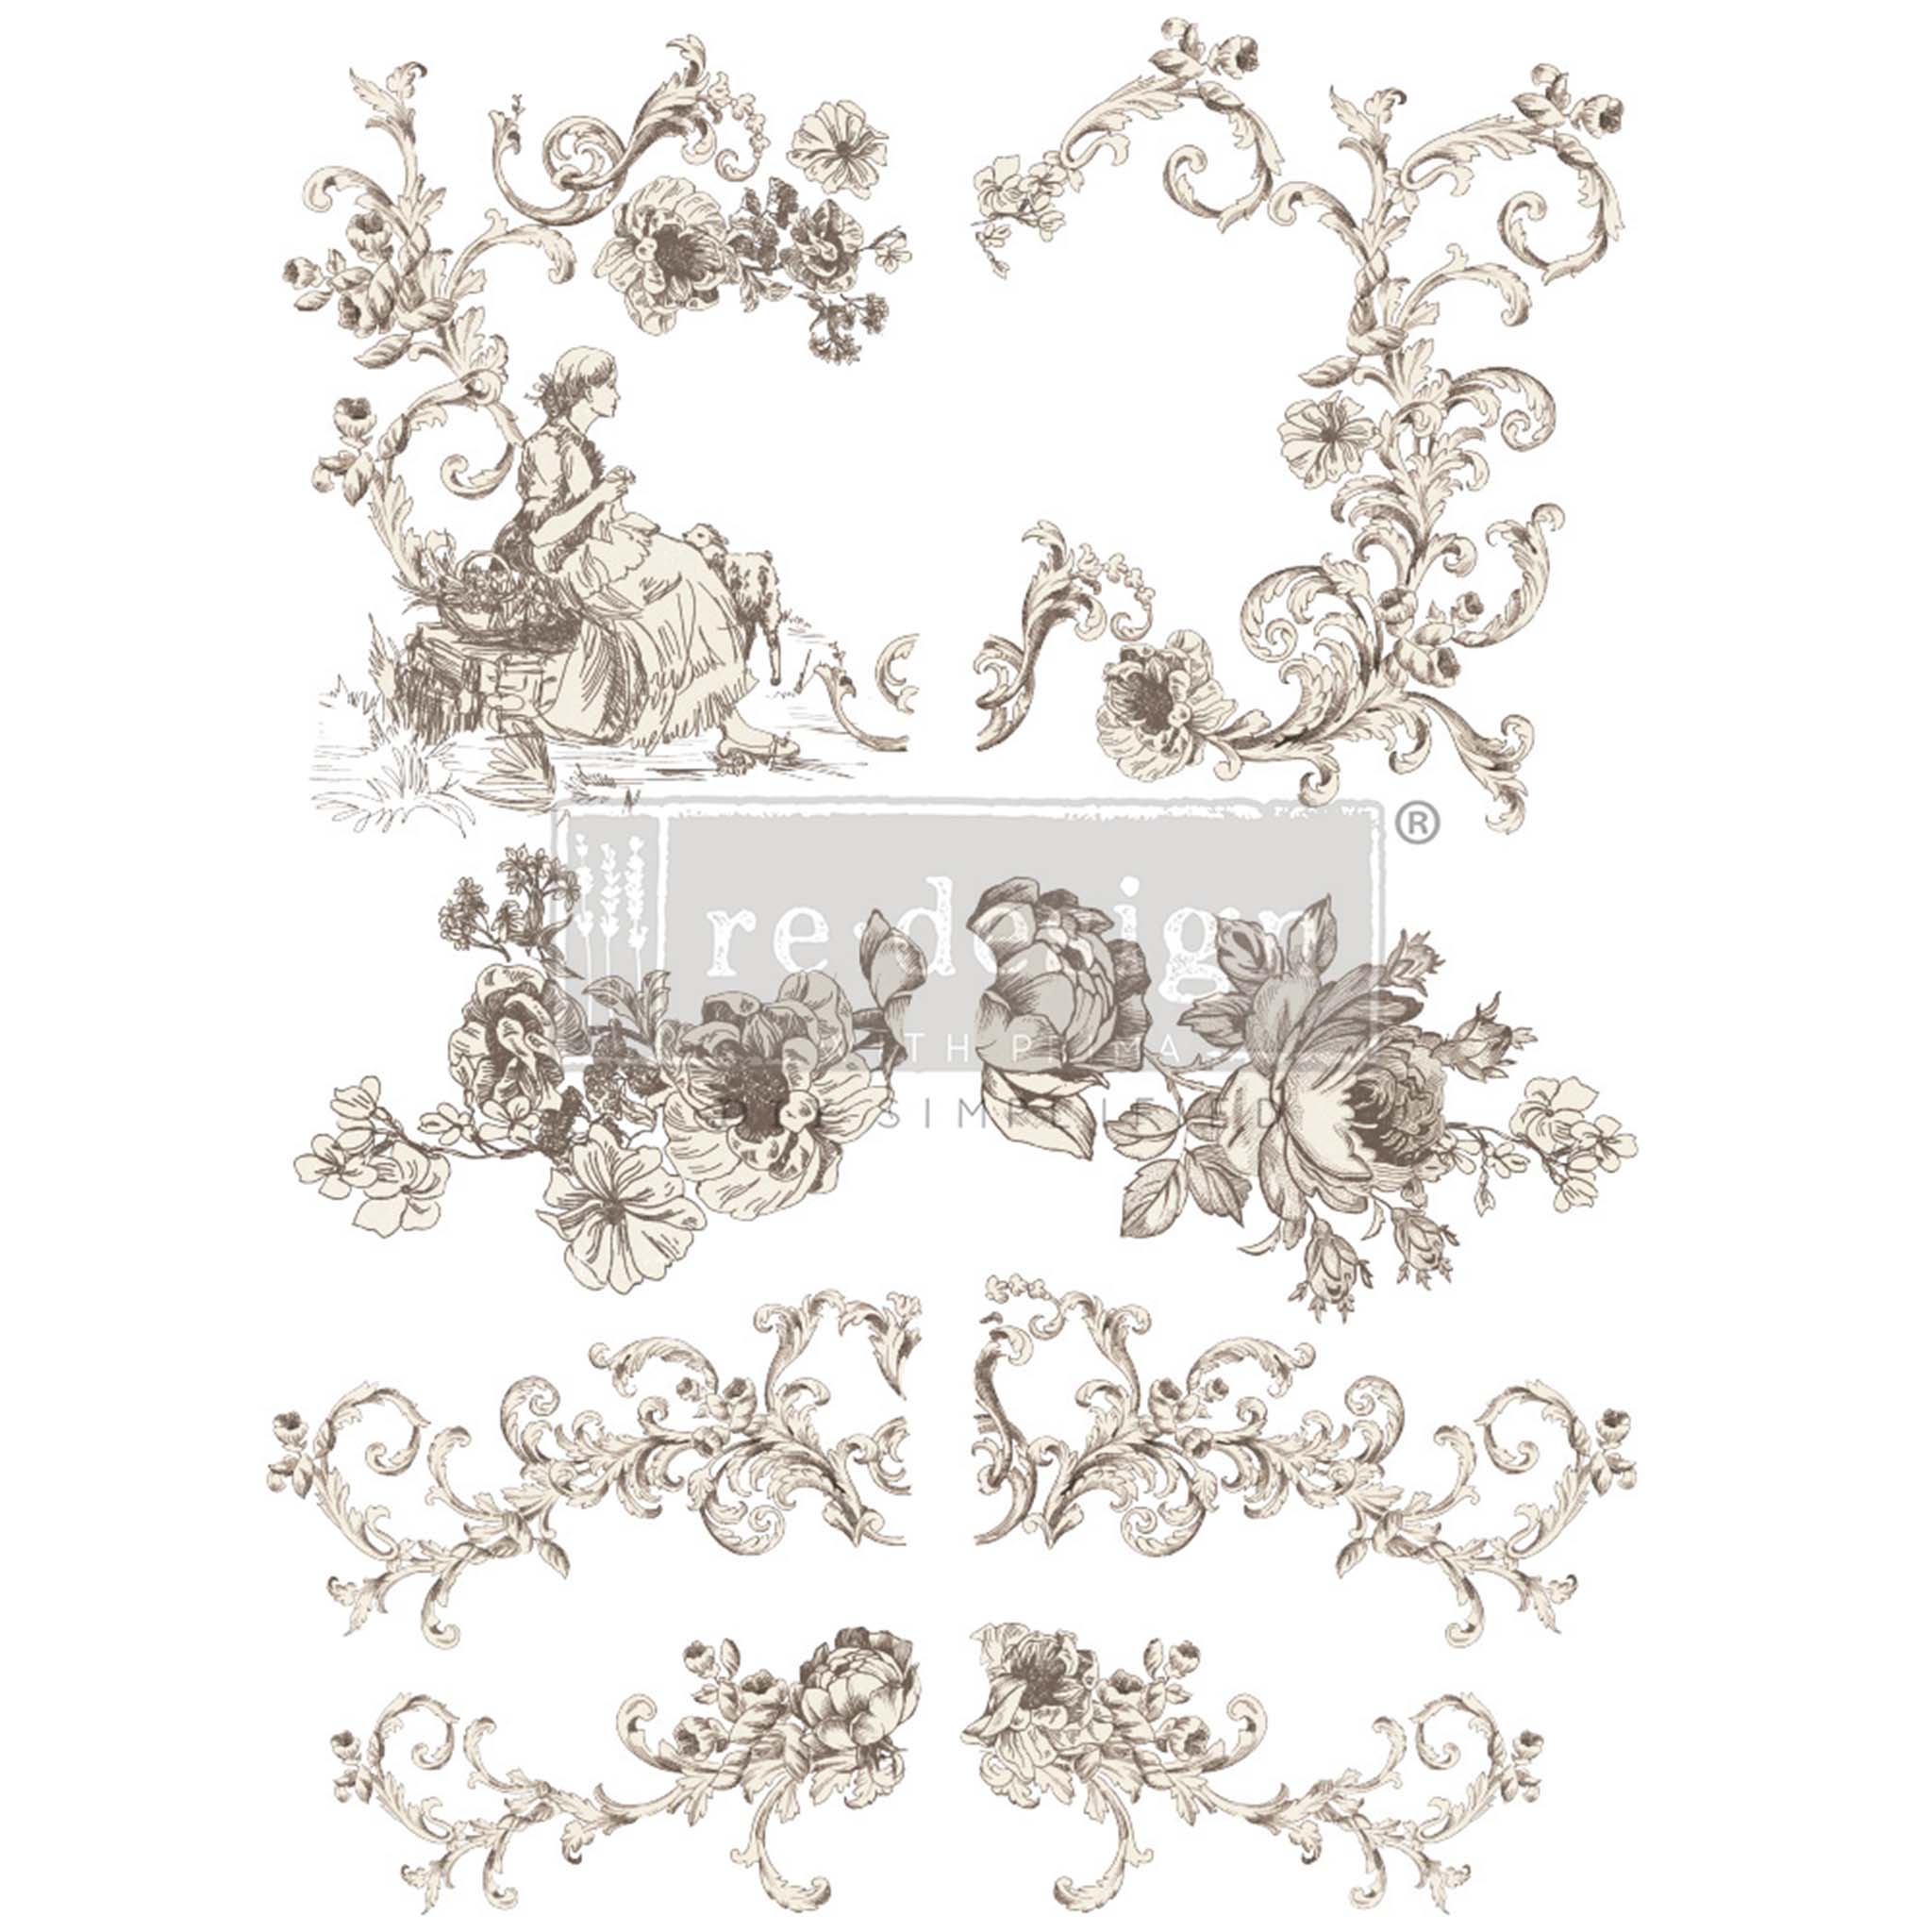 Rub-on furniture transfer design of 8 vintage dainty floral scrolls, one with a woman sitting.